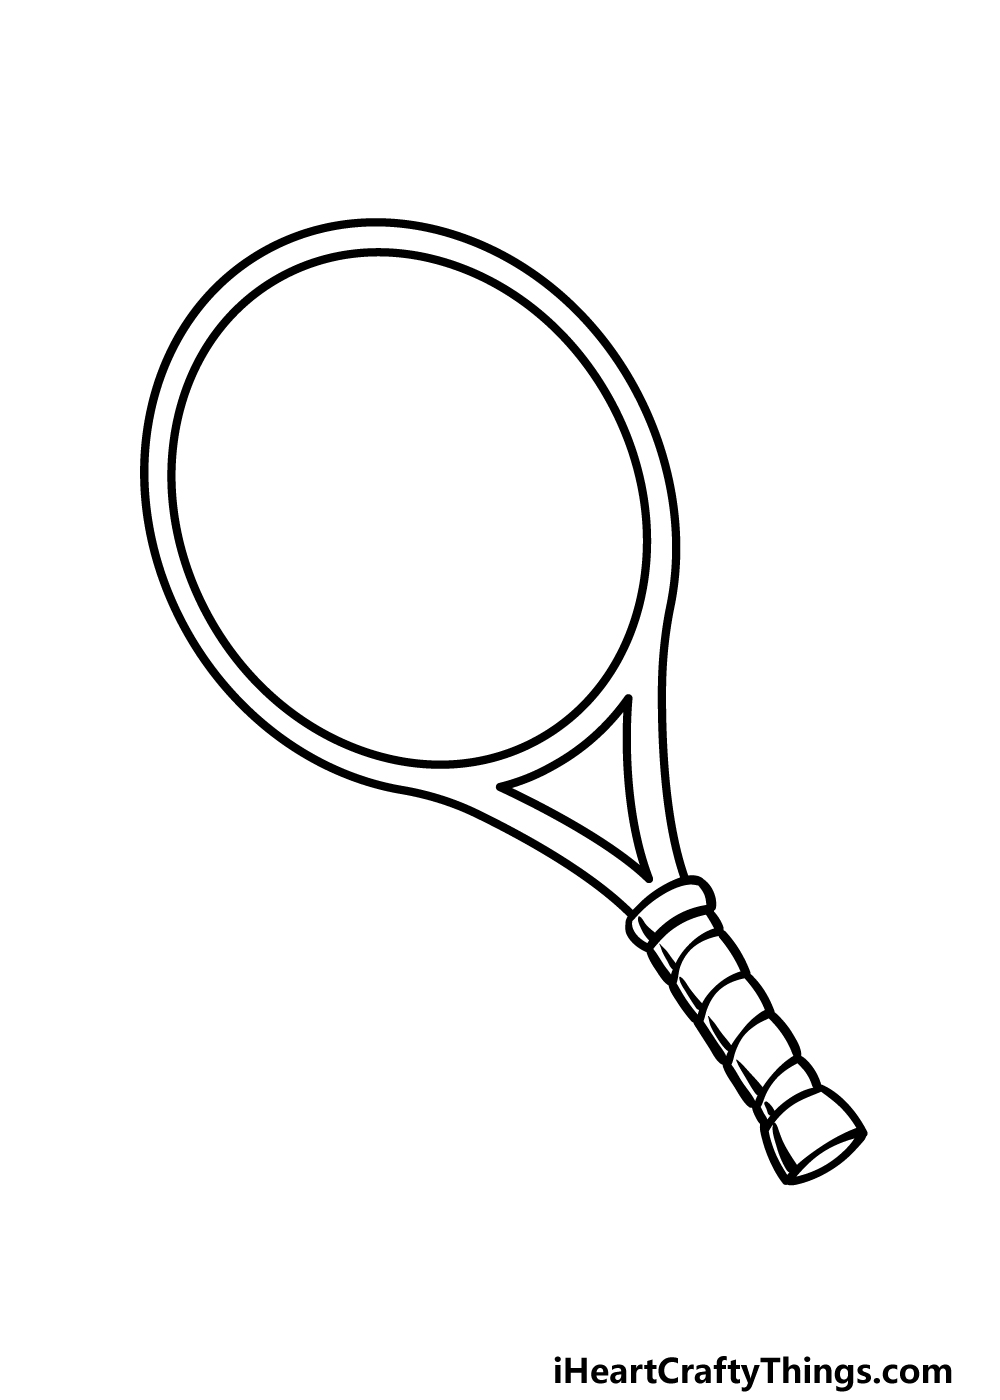 how to draw a Tennis Racket step 3